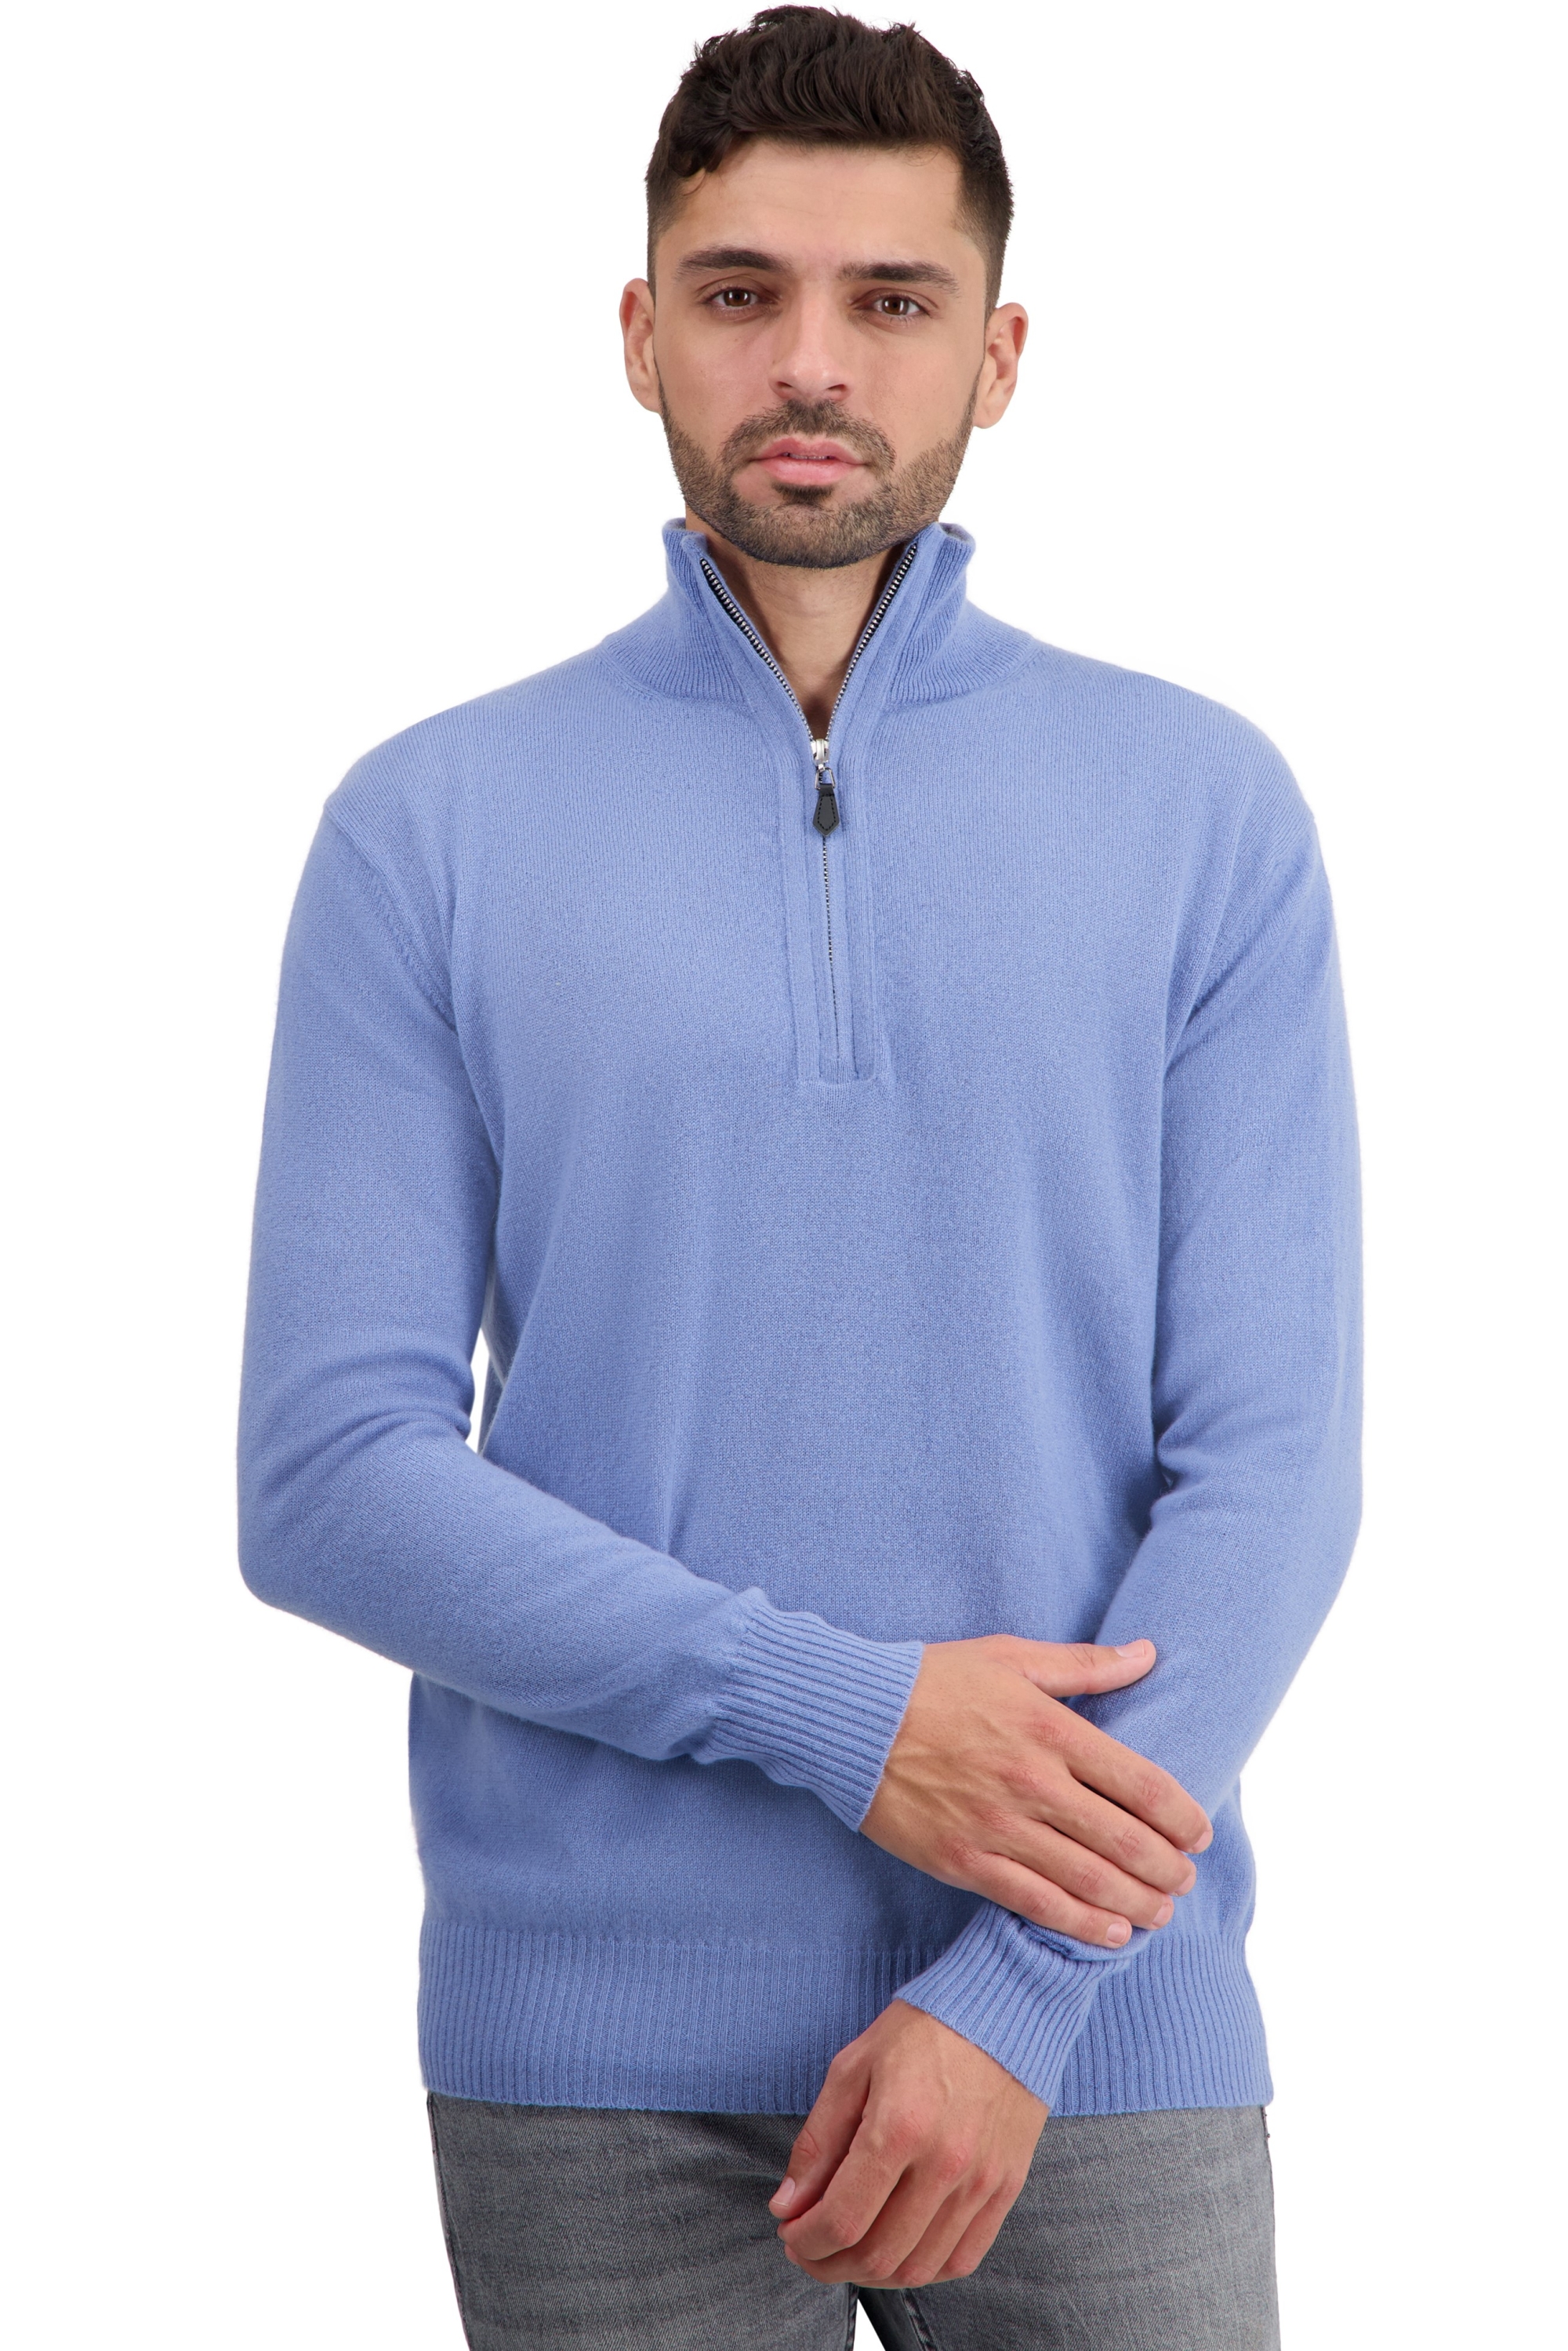 Cashmere men basic sweaters at low prices toulon first light blue 3xl